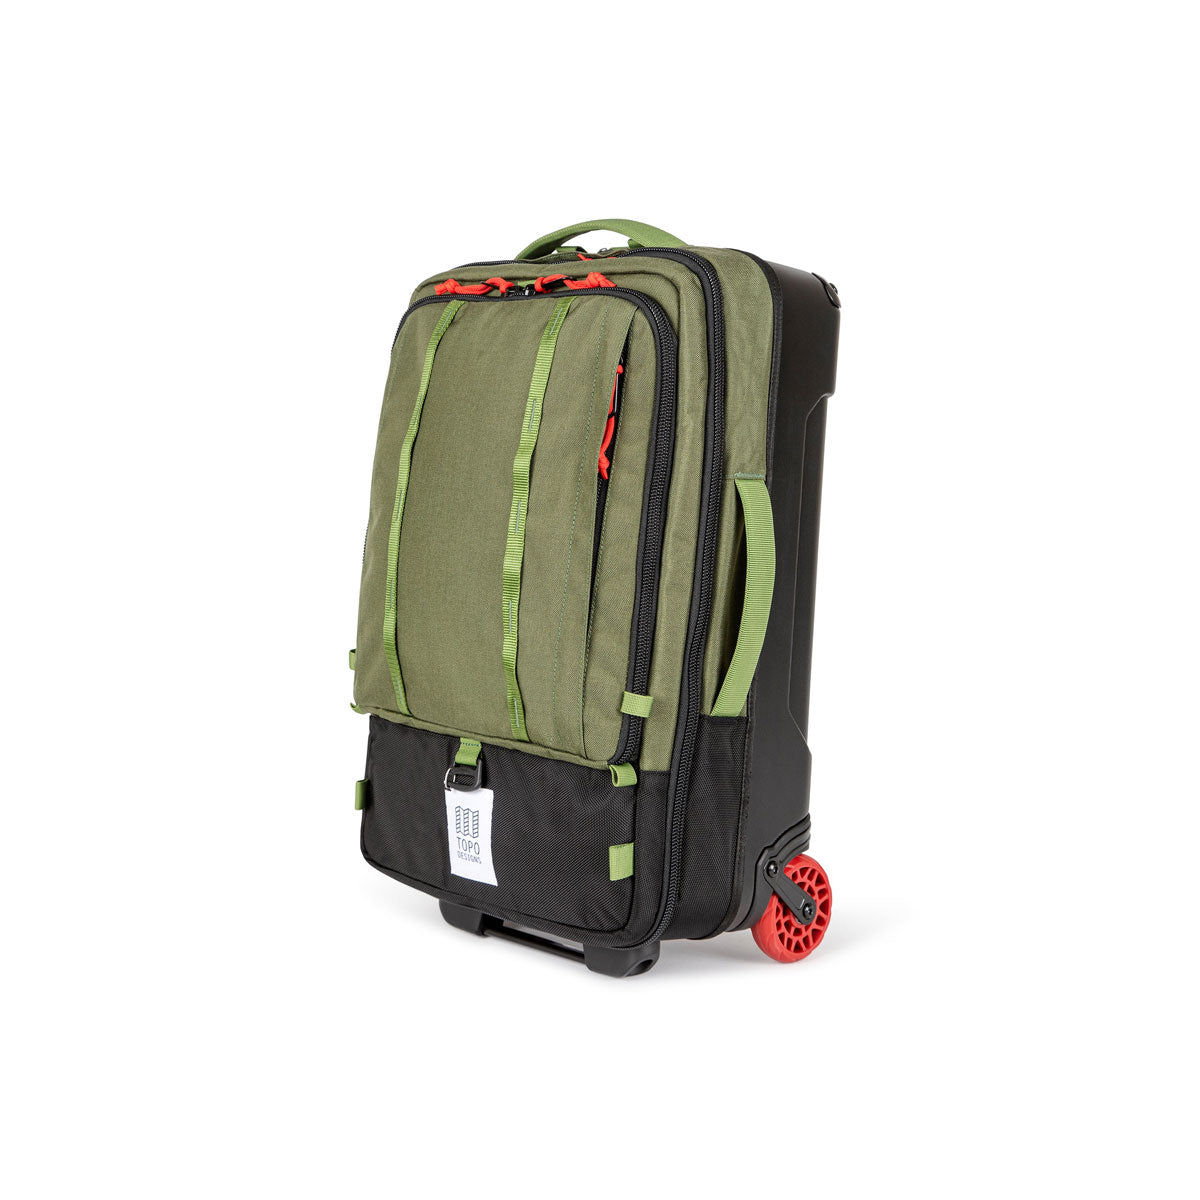 Global Travel Bag Roller by Topo Designs | The Bag Creature